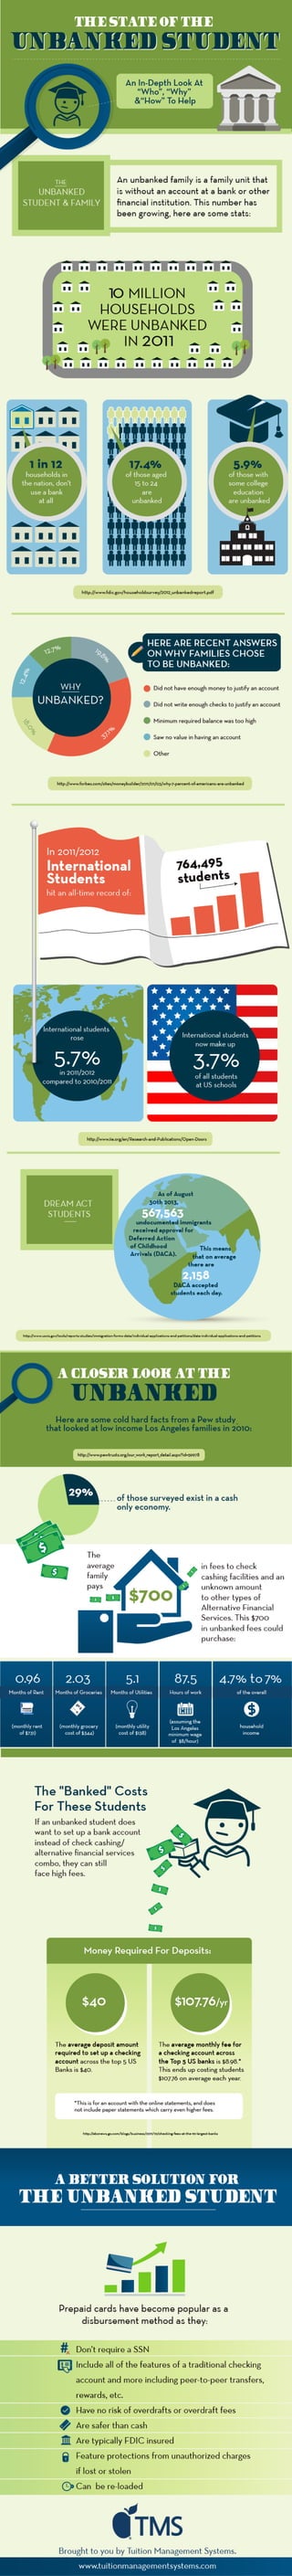 Infographic: The Who, The Why and The How of Helping Unbanked Students